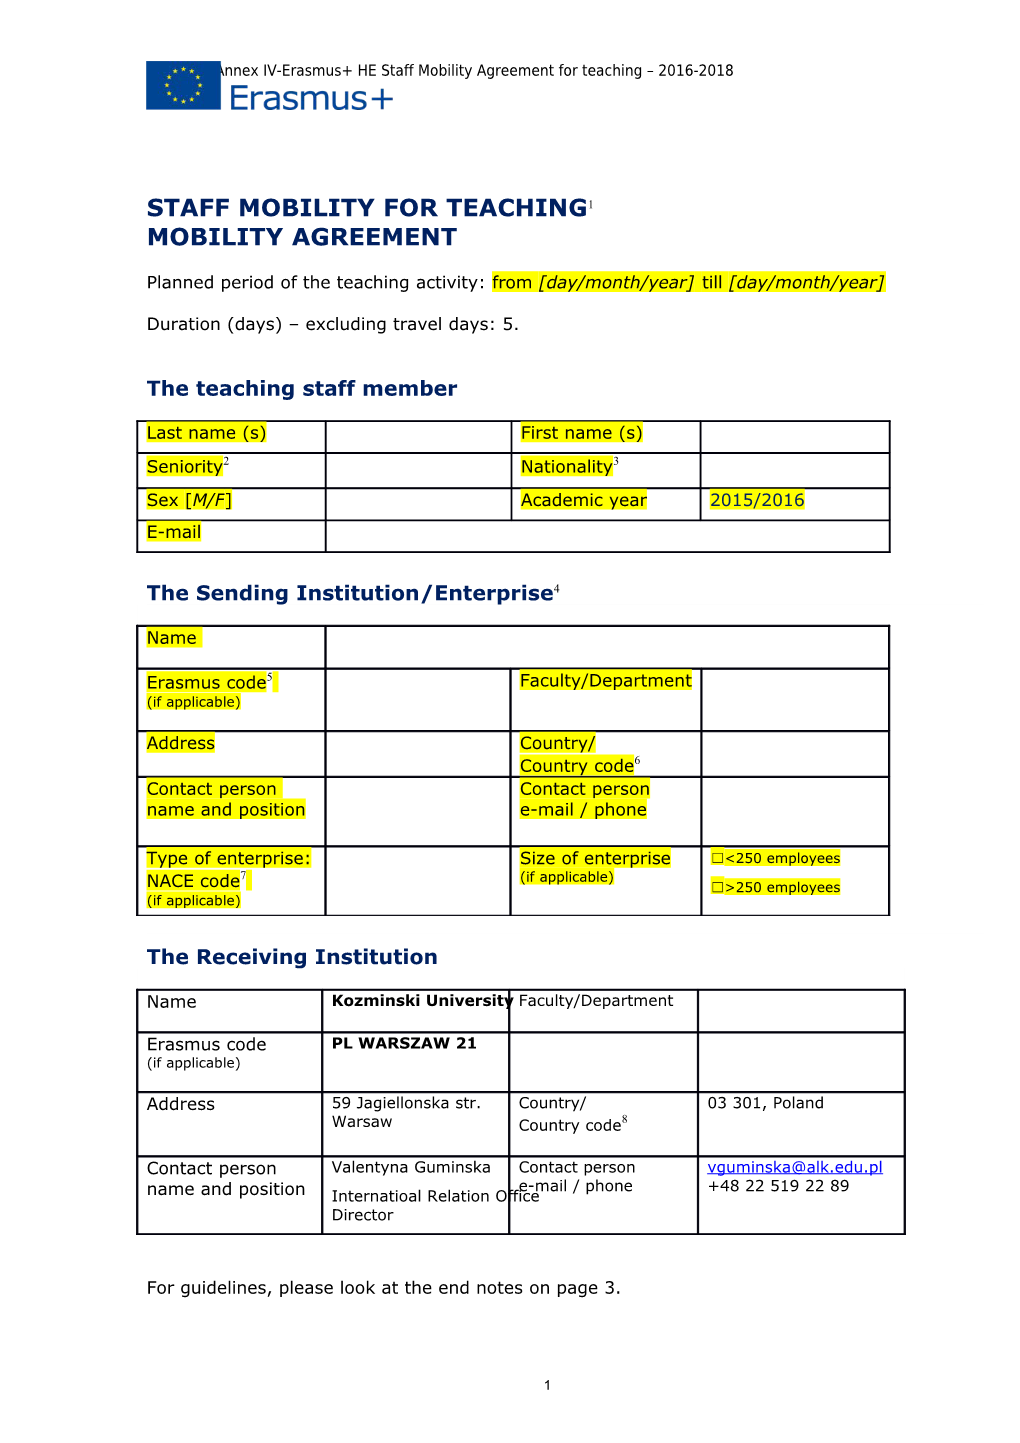 Gfna-II-C-Annex IV-Erasmus+ HE Staff Mobility Agreement for Teaching 2016-2018